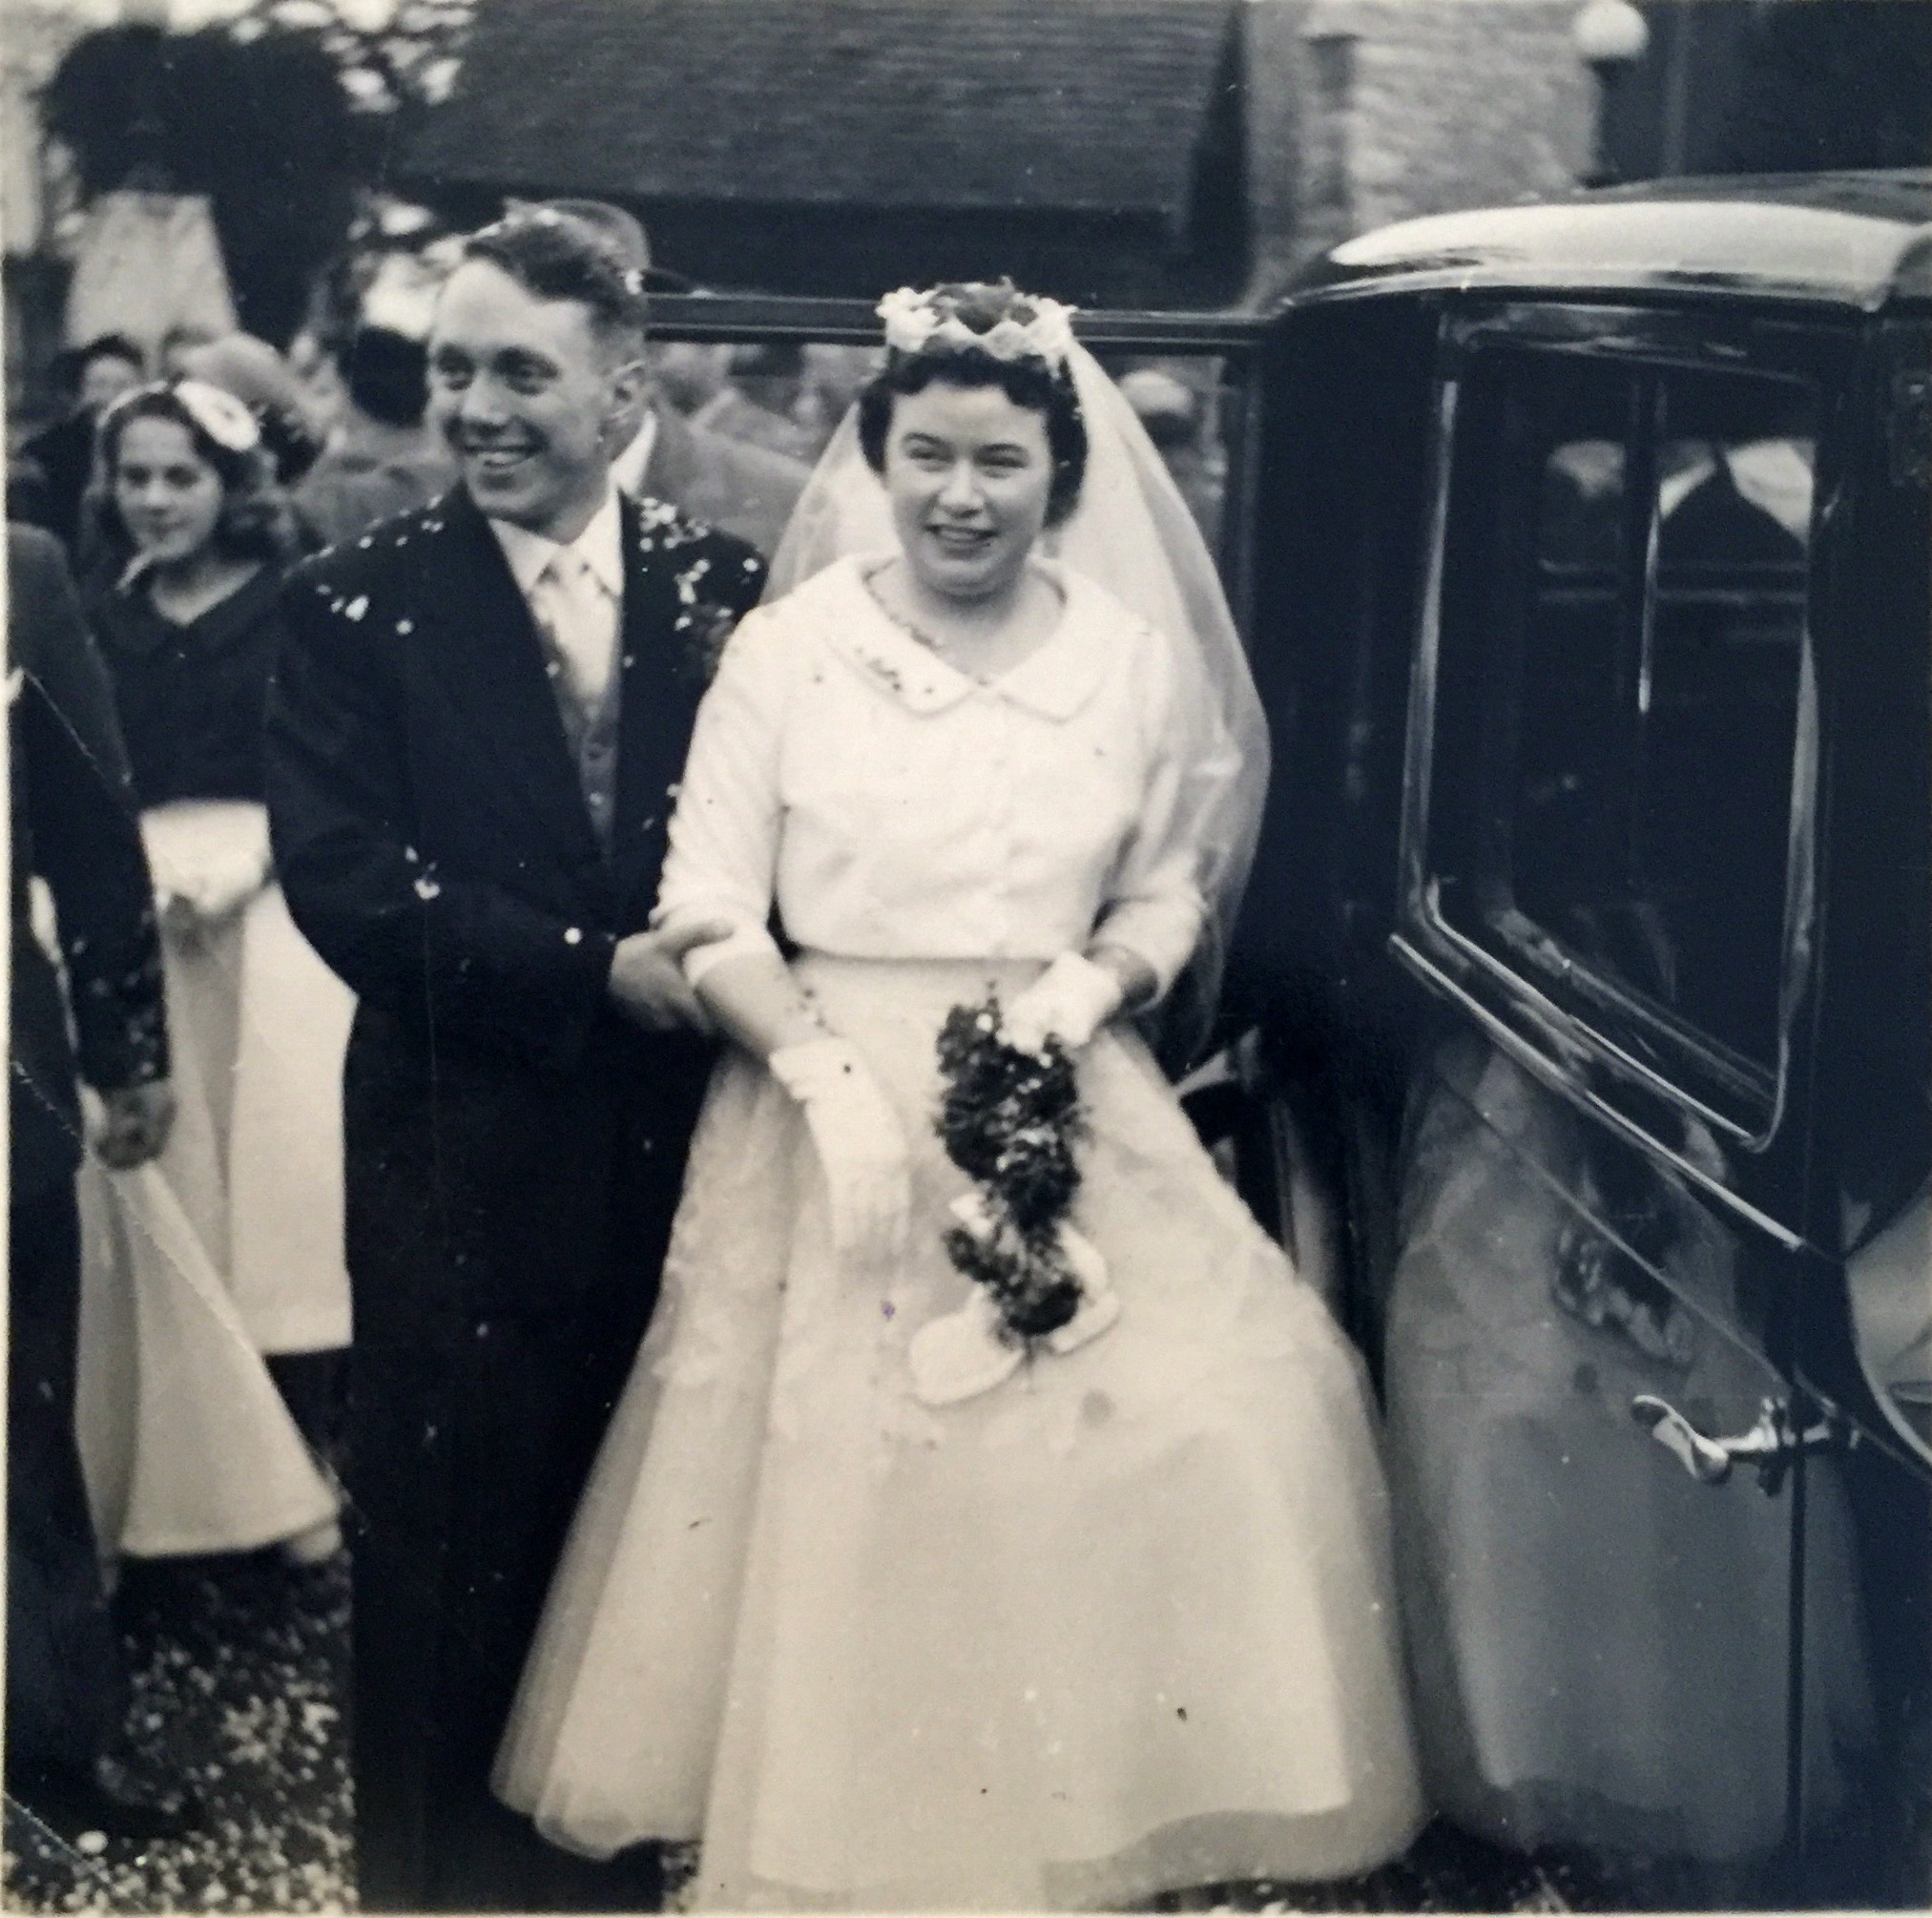 Just Married! West London. UK 1956